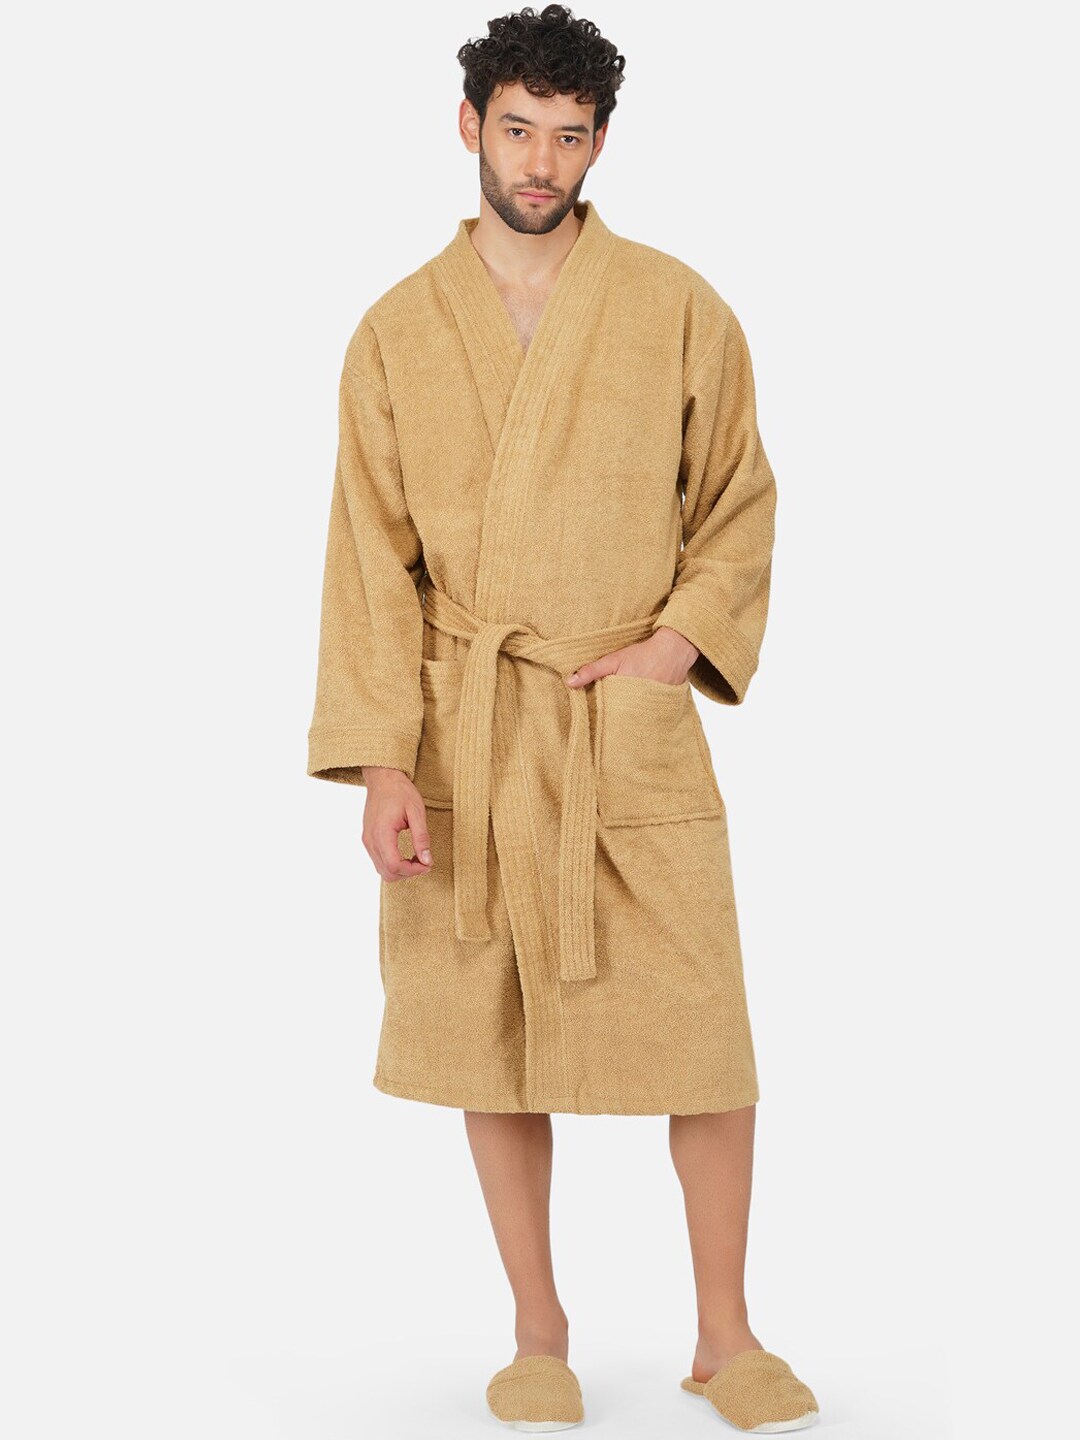 RANGOLI Unisex Beige Pure Cotton 400 GSM Large Bath Robe with Slippers Price in India